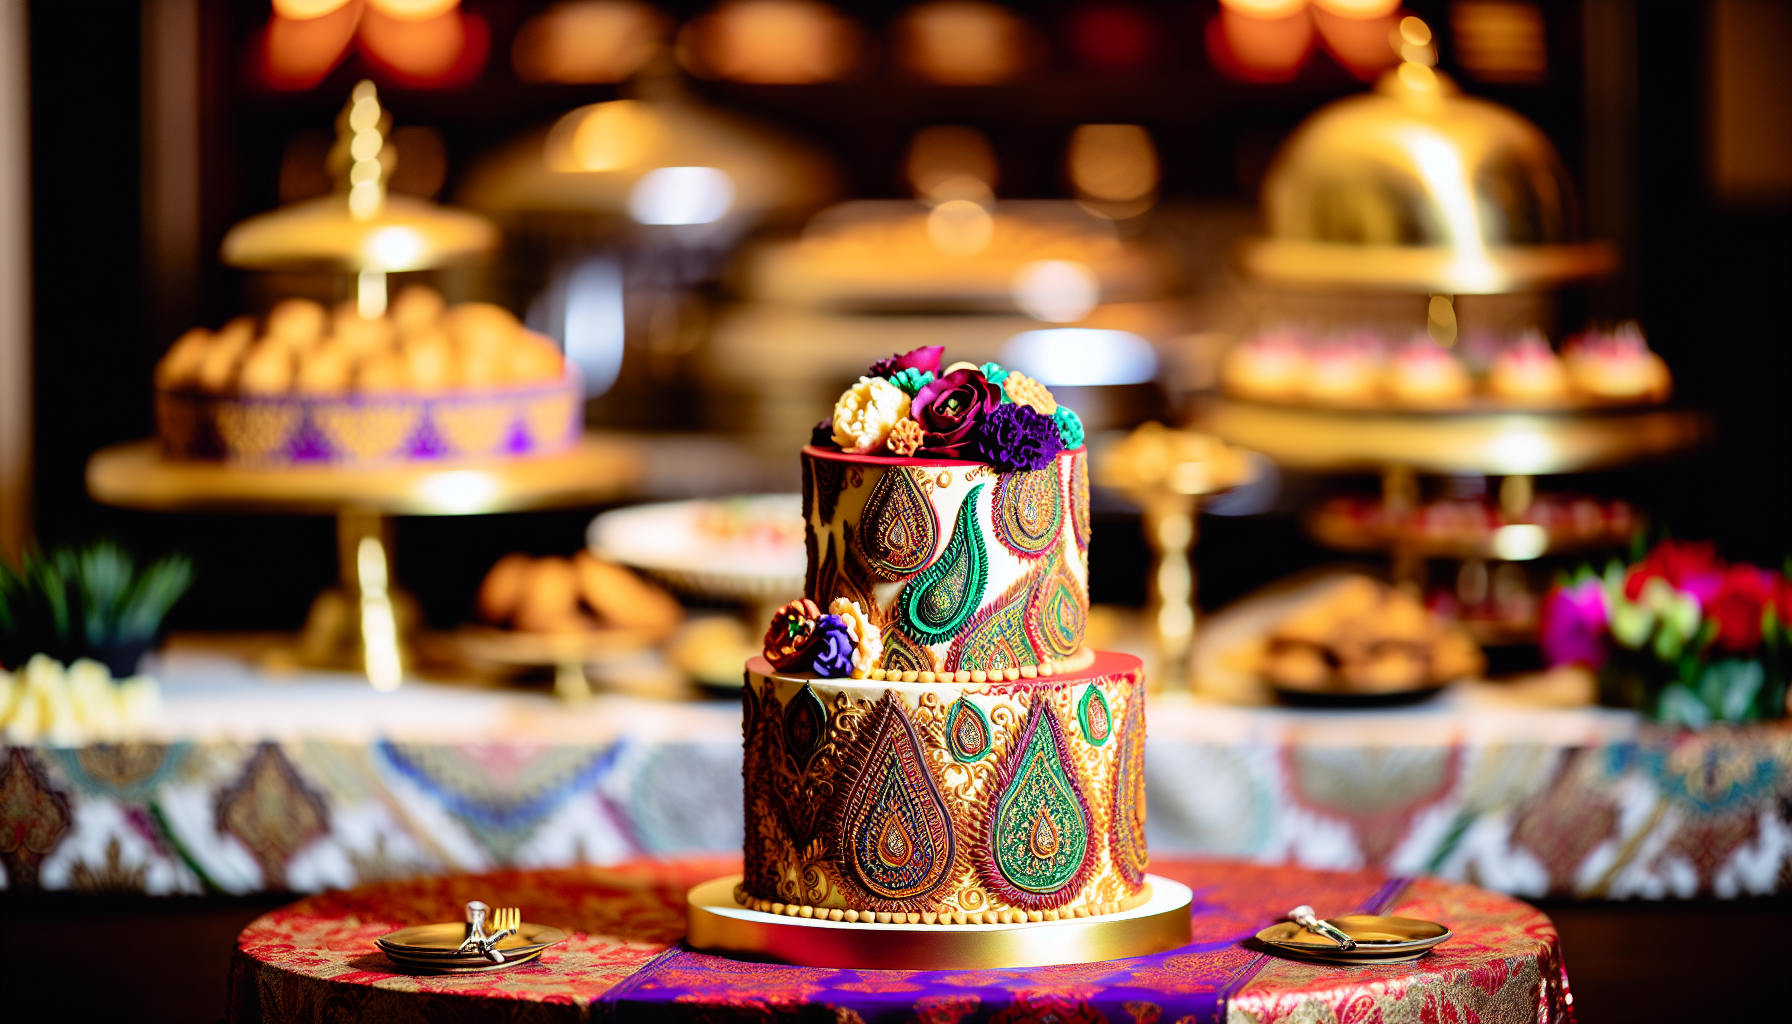 An exquisite Indian-inspired birthday cake for a special celebration